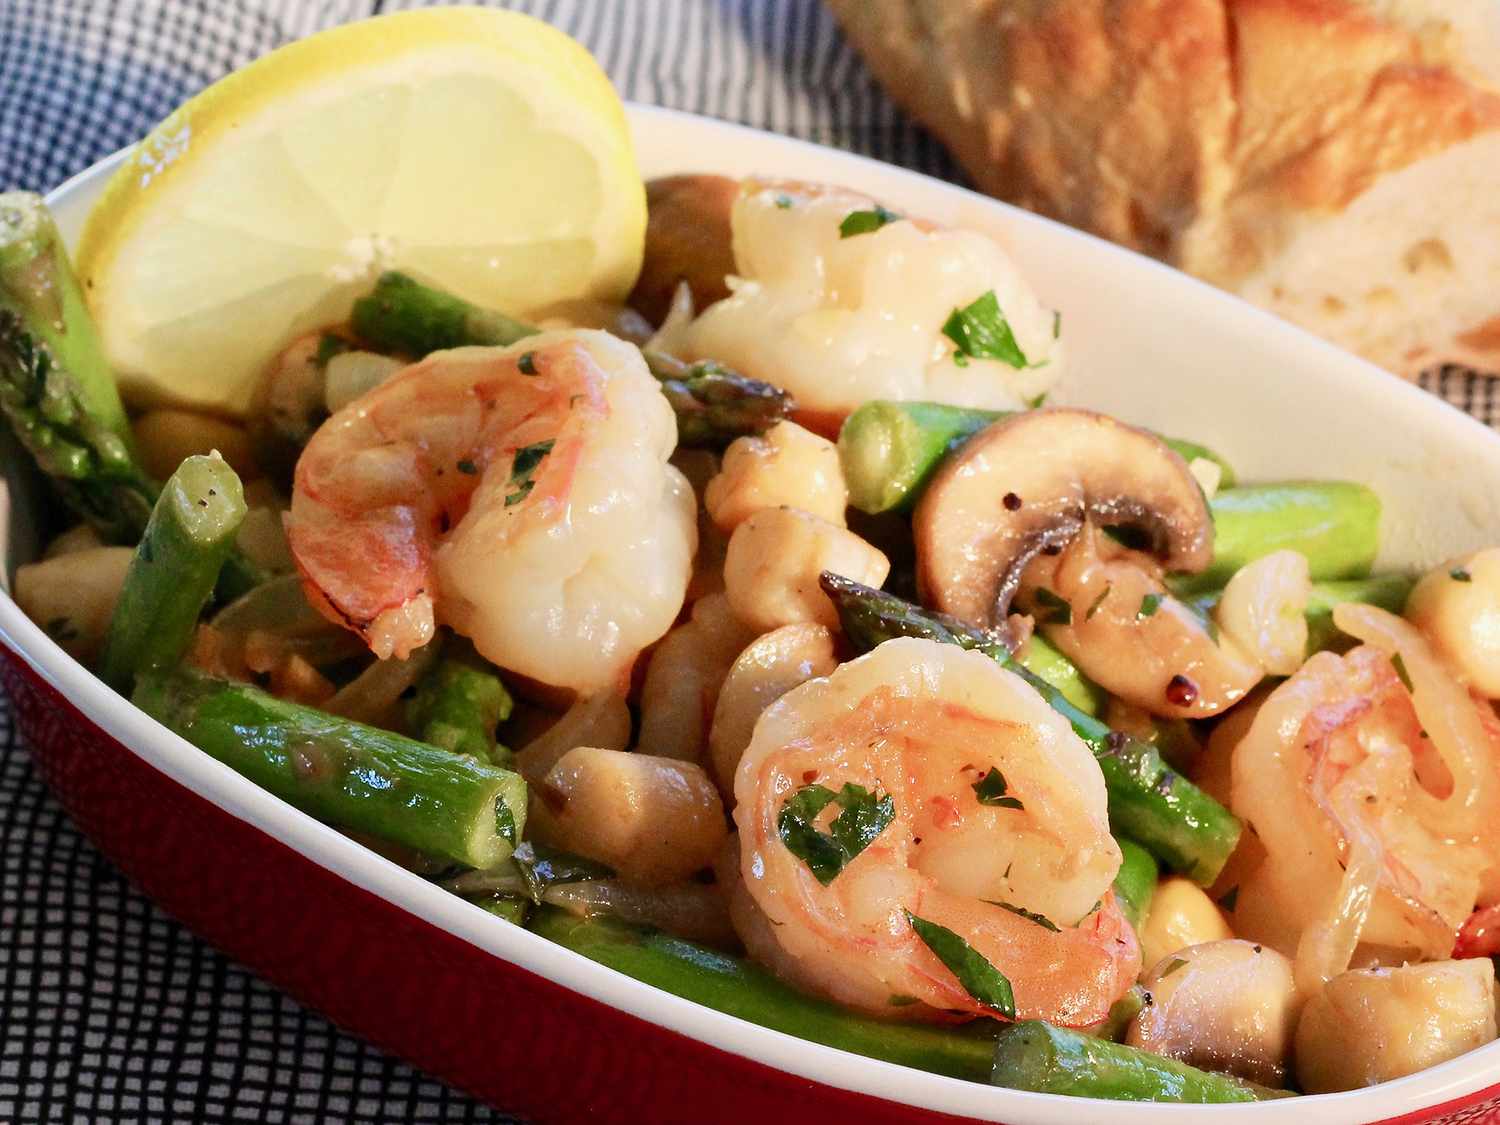 Shrimp And Scallop Stir Fry Recipe: Easy, Healthy, and Flavorful